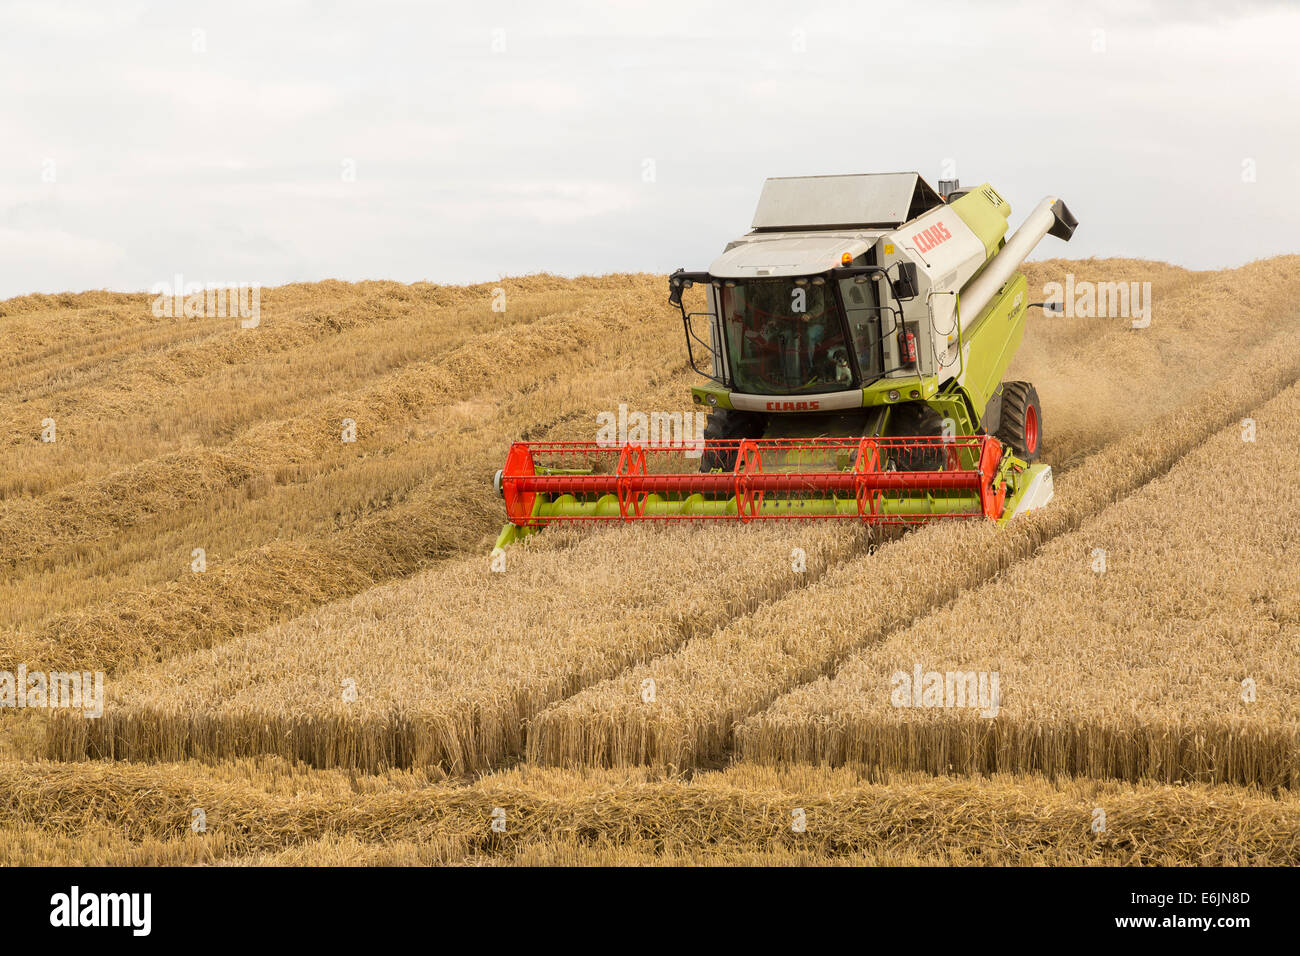 Combine harvester harvesting wheat from a wheat crop. Scotland, UK Stock Photo